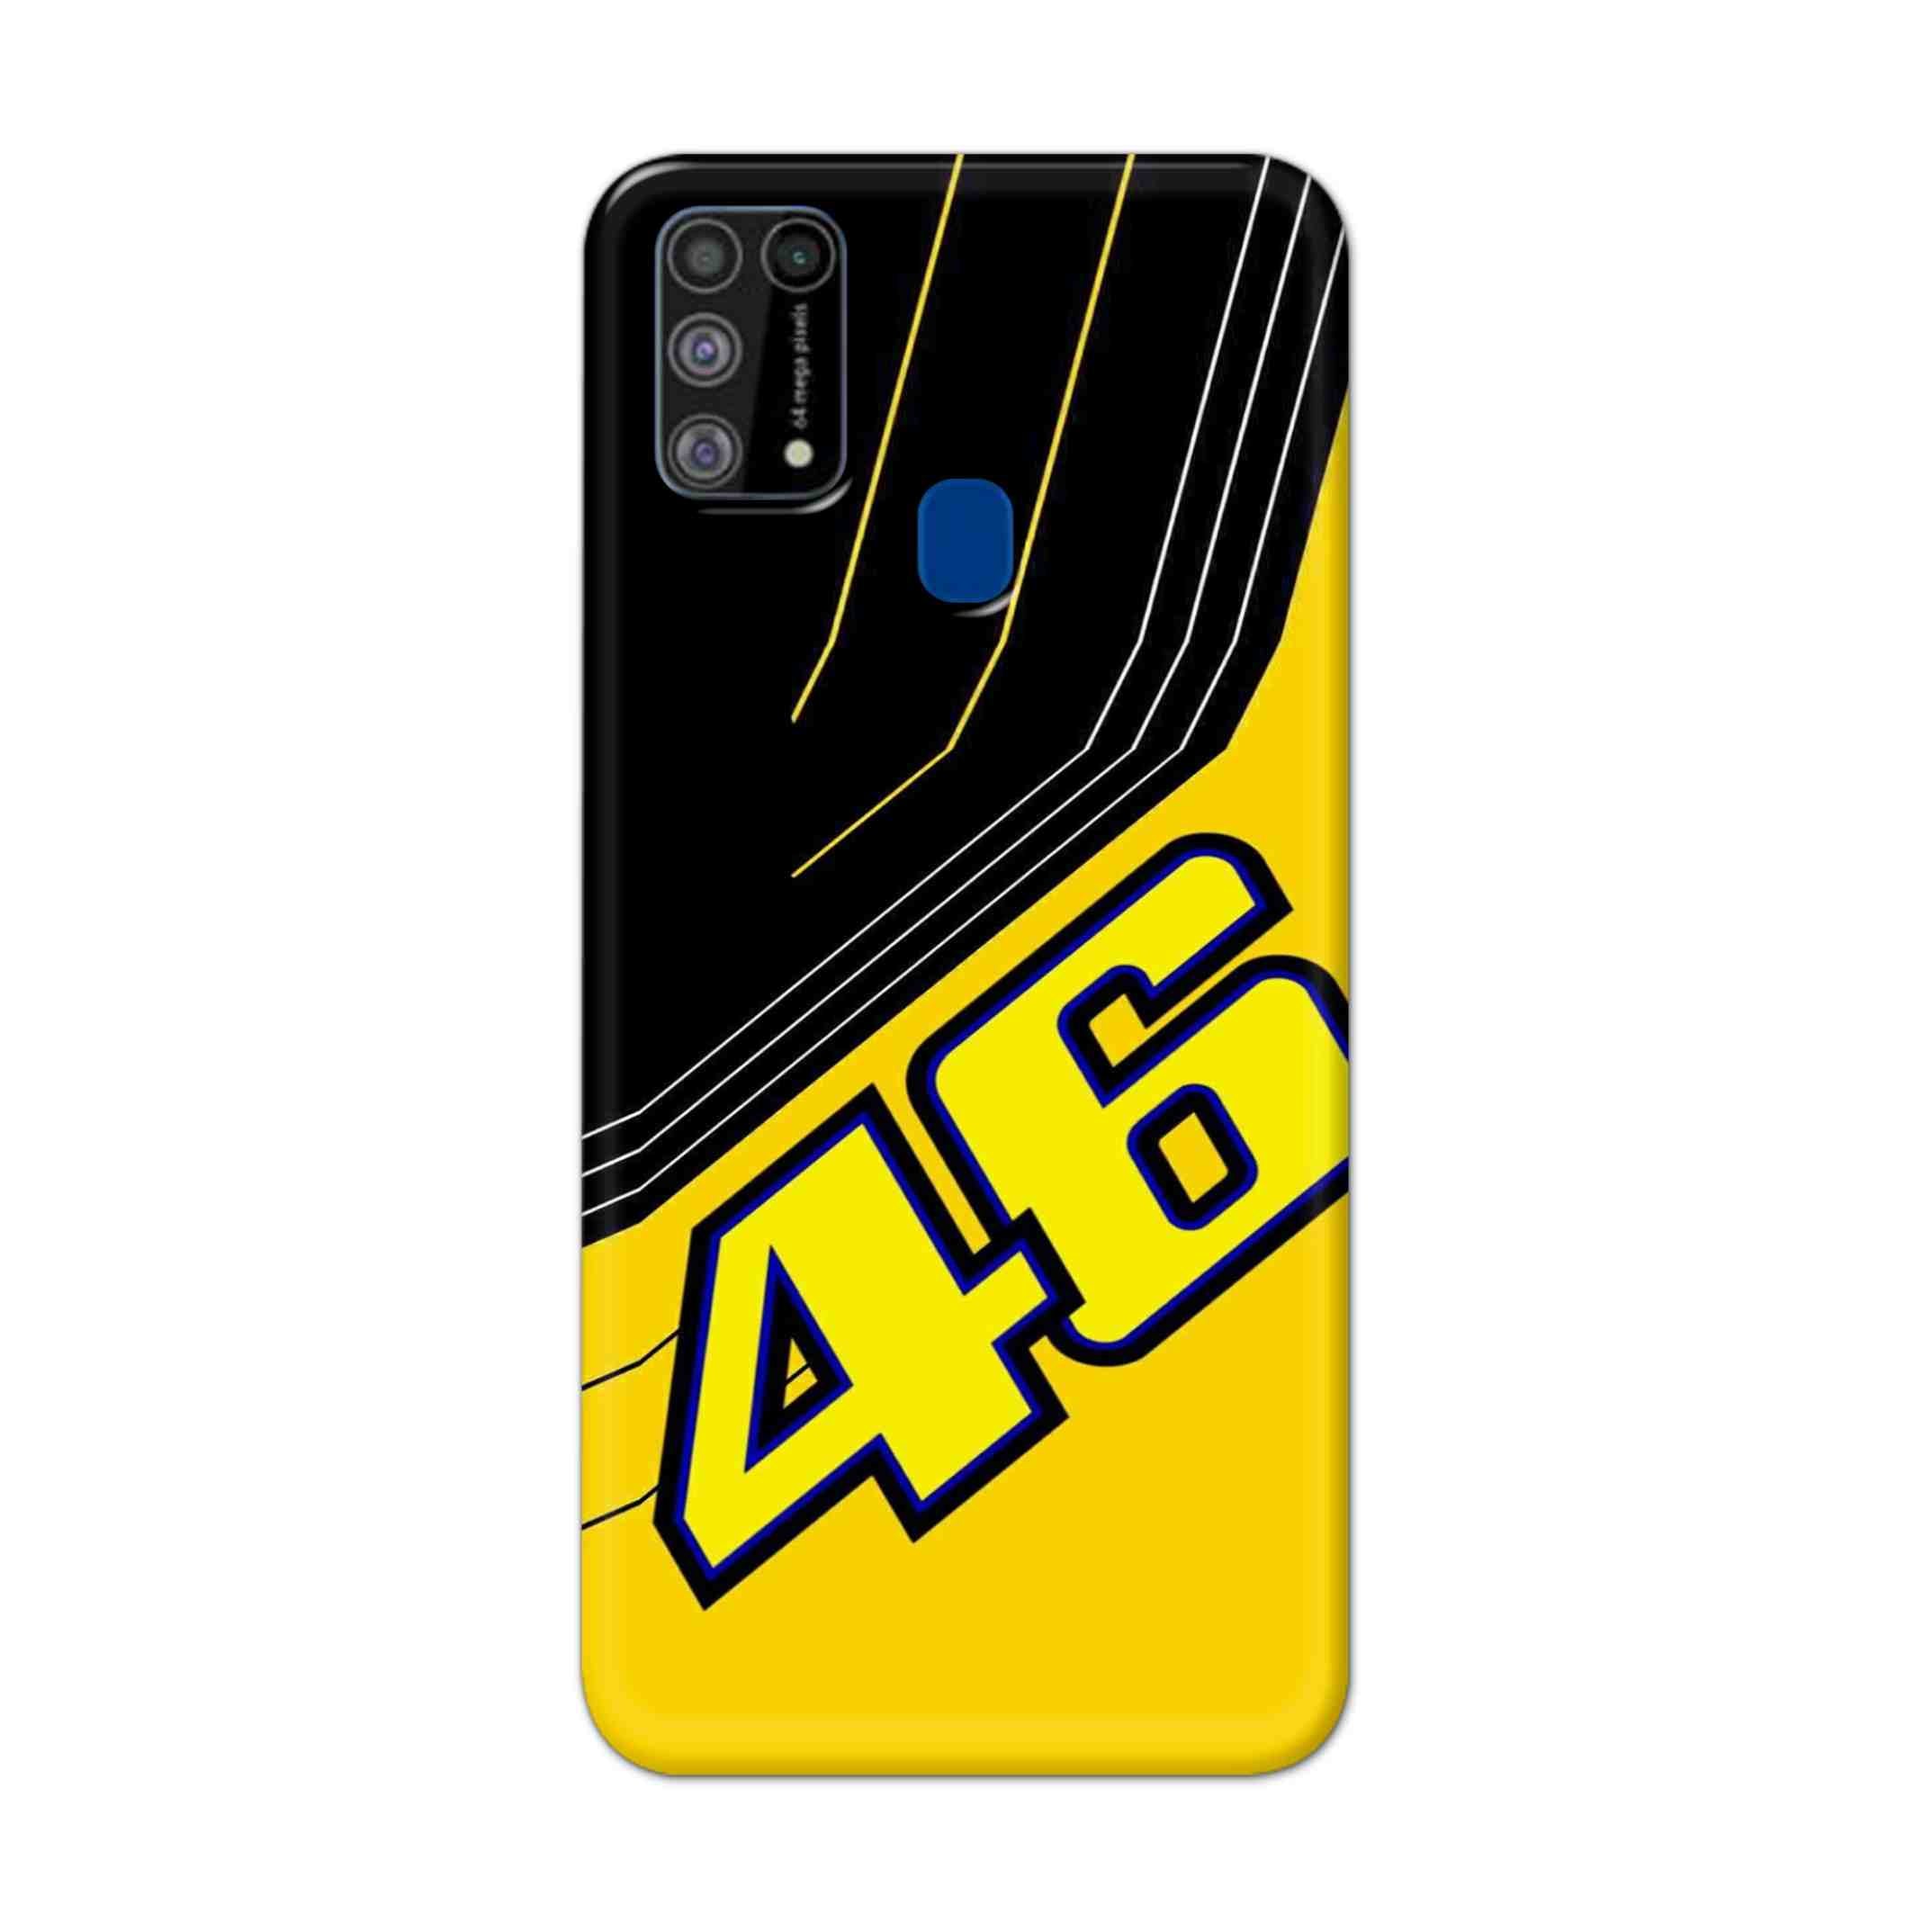 Buy 46 Hard Back Mobile Phone Case Cover For Samsung Galaxy M31 Online